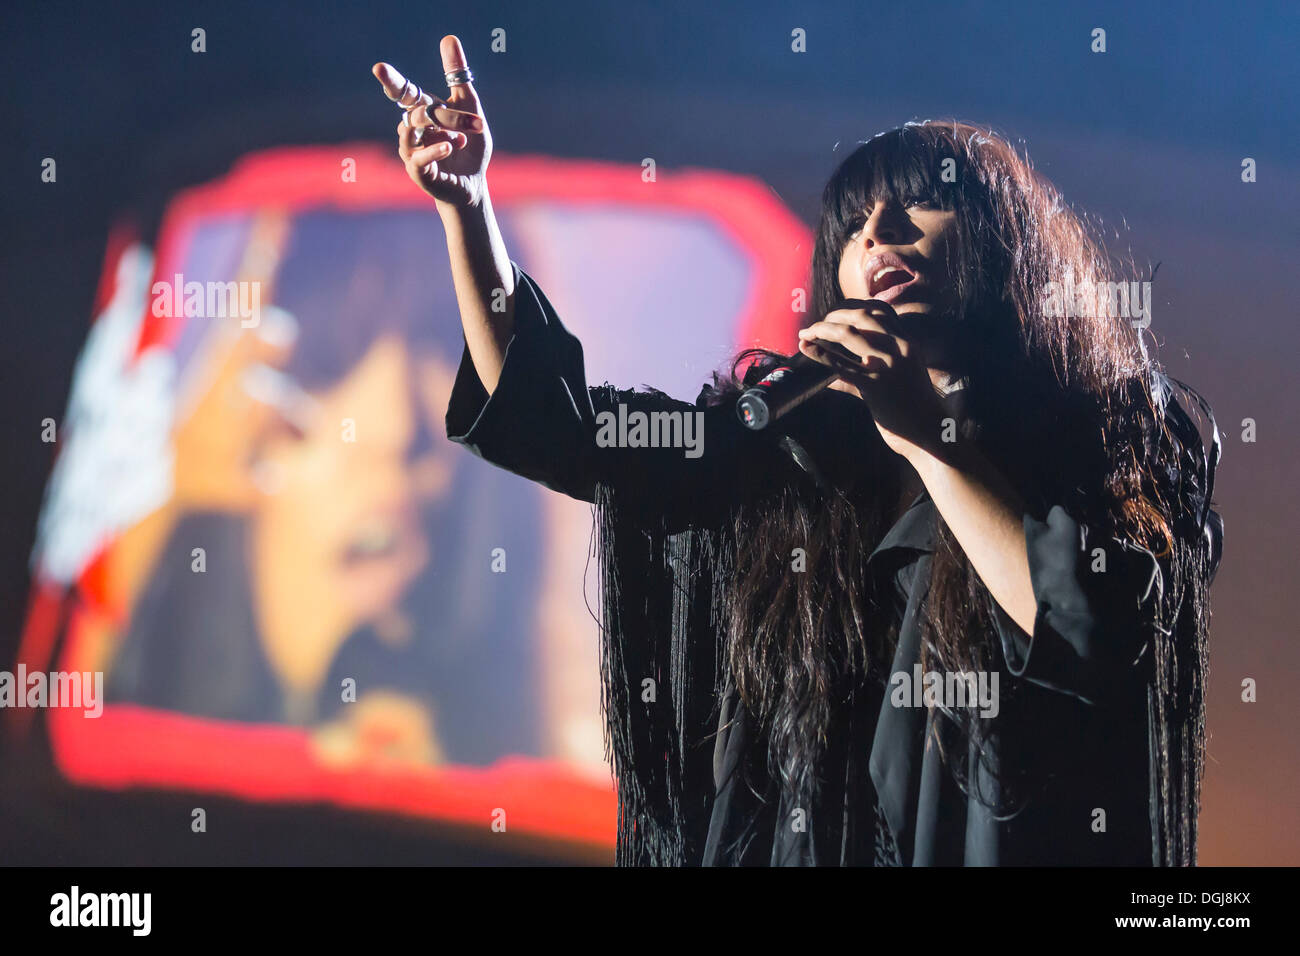 Loreen, Swedish singer of Berber-Moroccan origin, winner of the Eurovision Song Contest 2012, performing live at Energy Stars Stock Photo